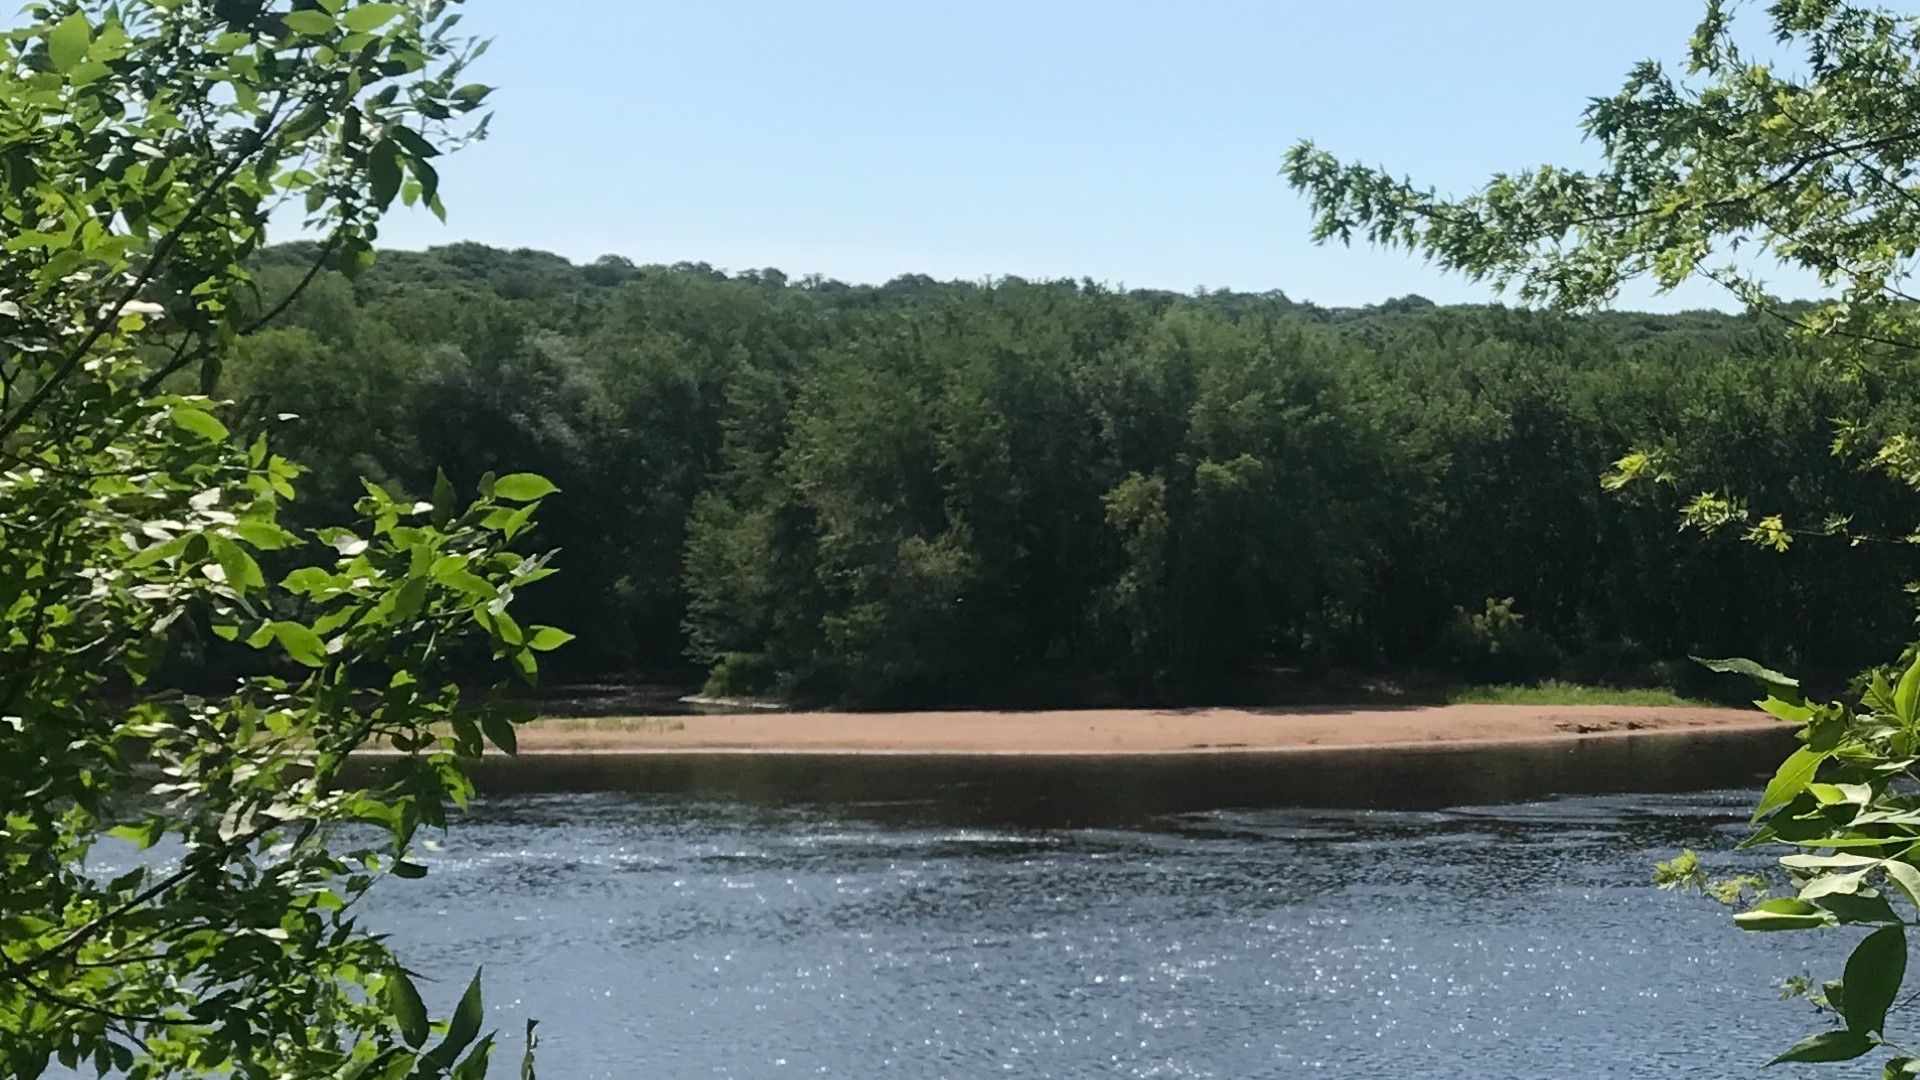 There's plenty of space to explore at the 6,000 acre park located along 18 miles of the St. Croix River.